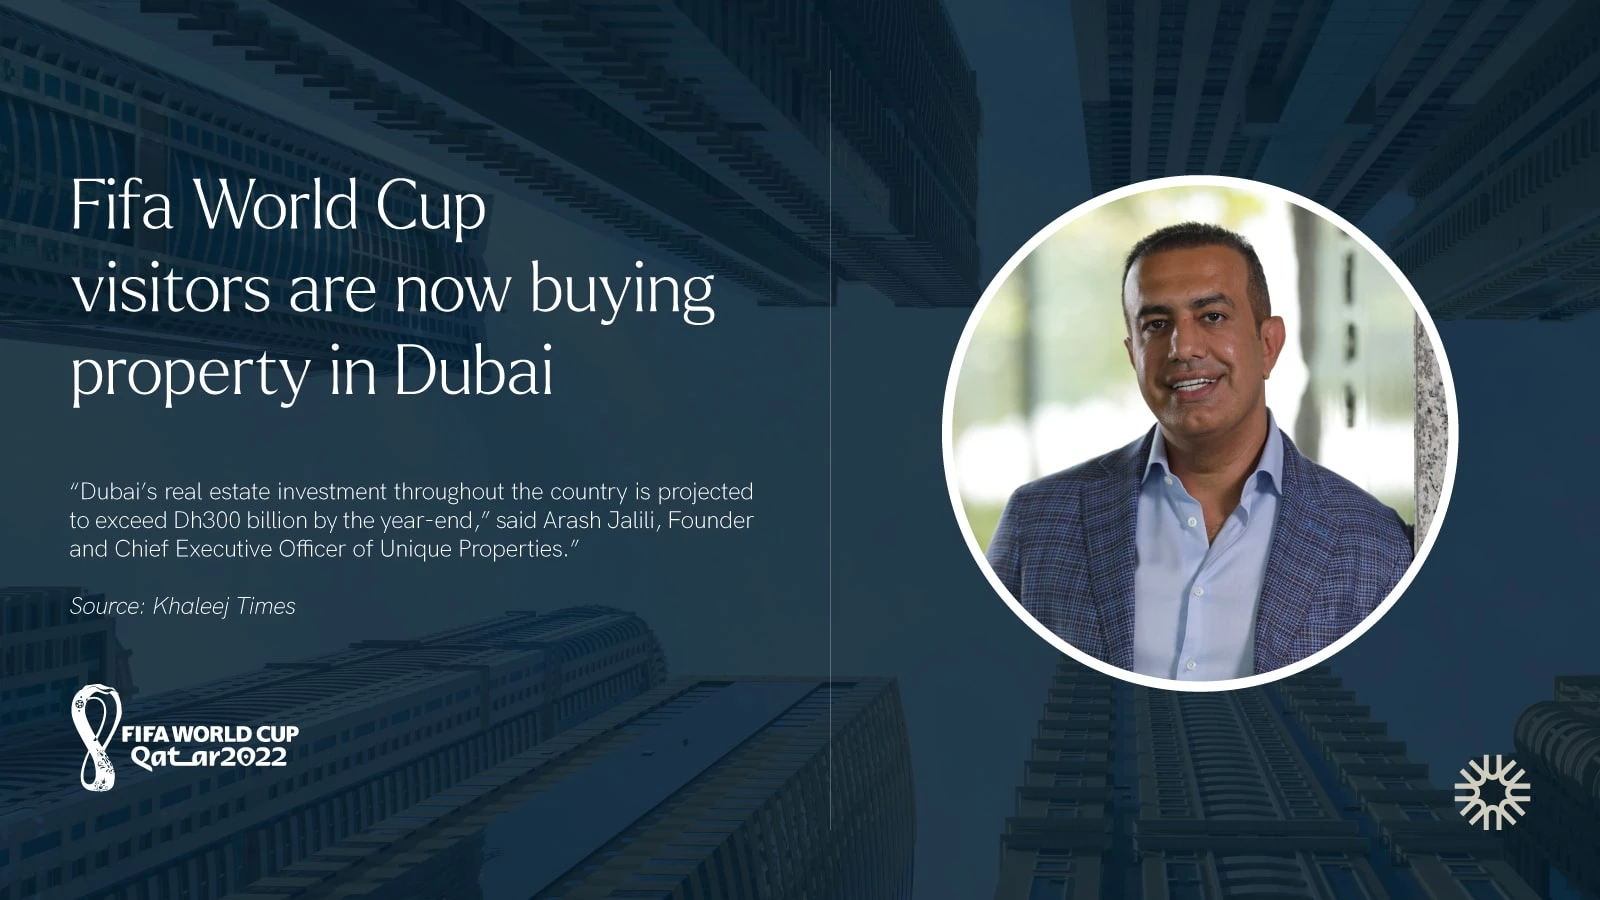 Fifa World Cup visitors are now buying property in Dubai; here's why.